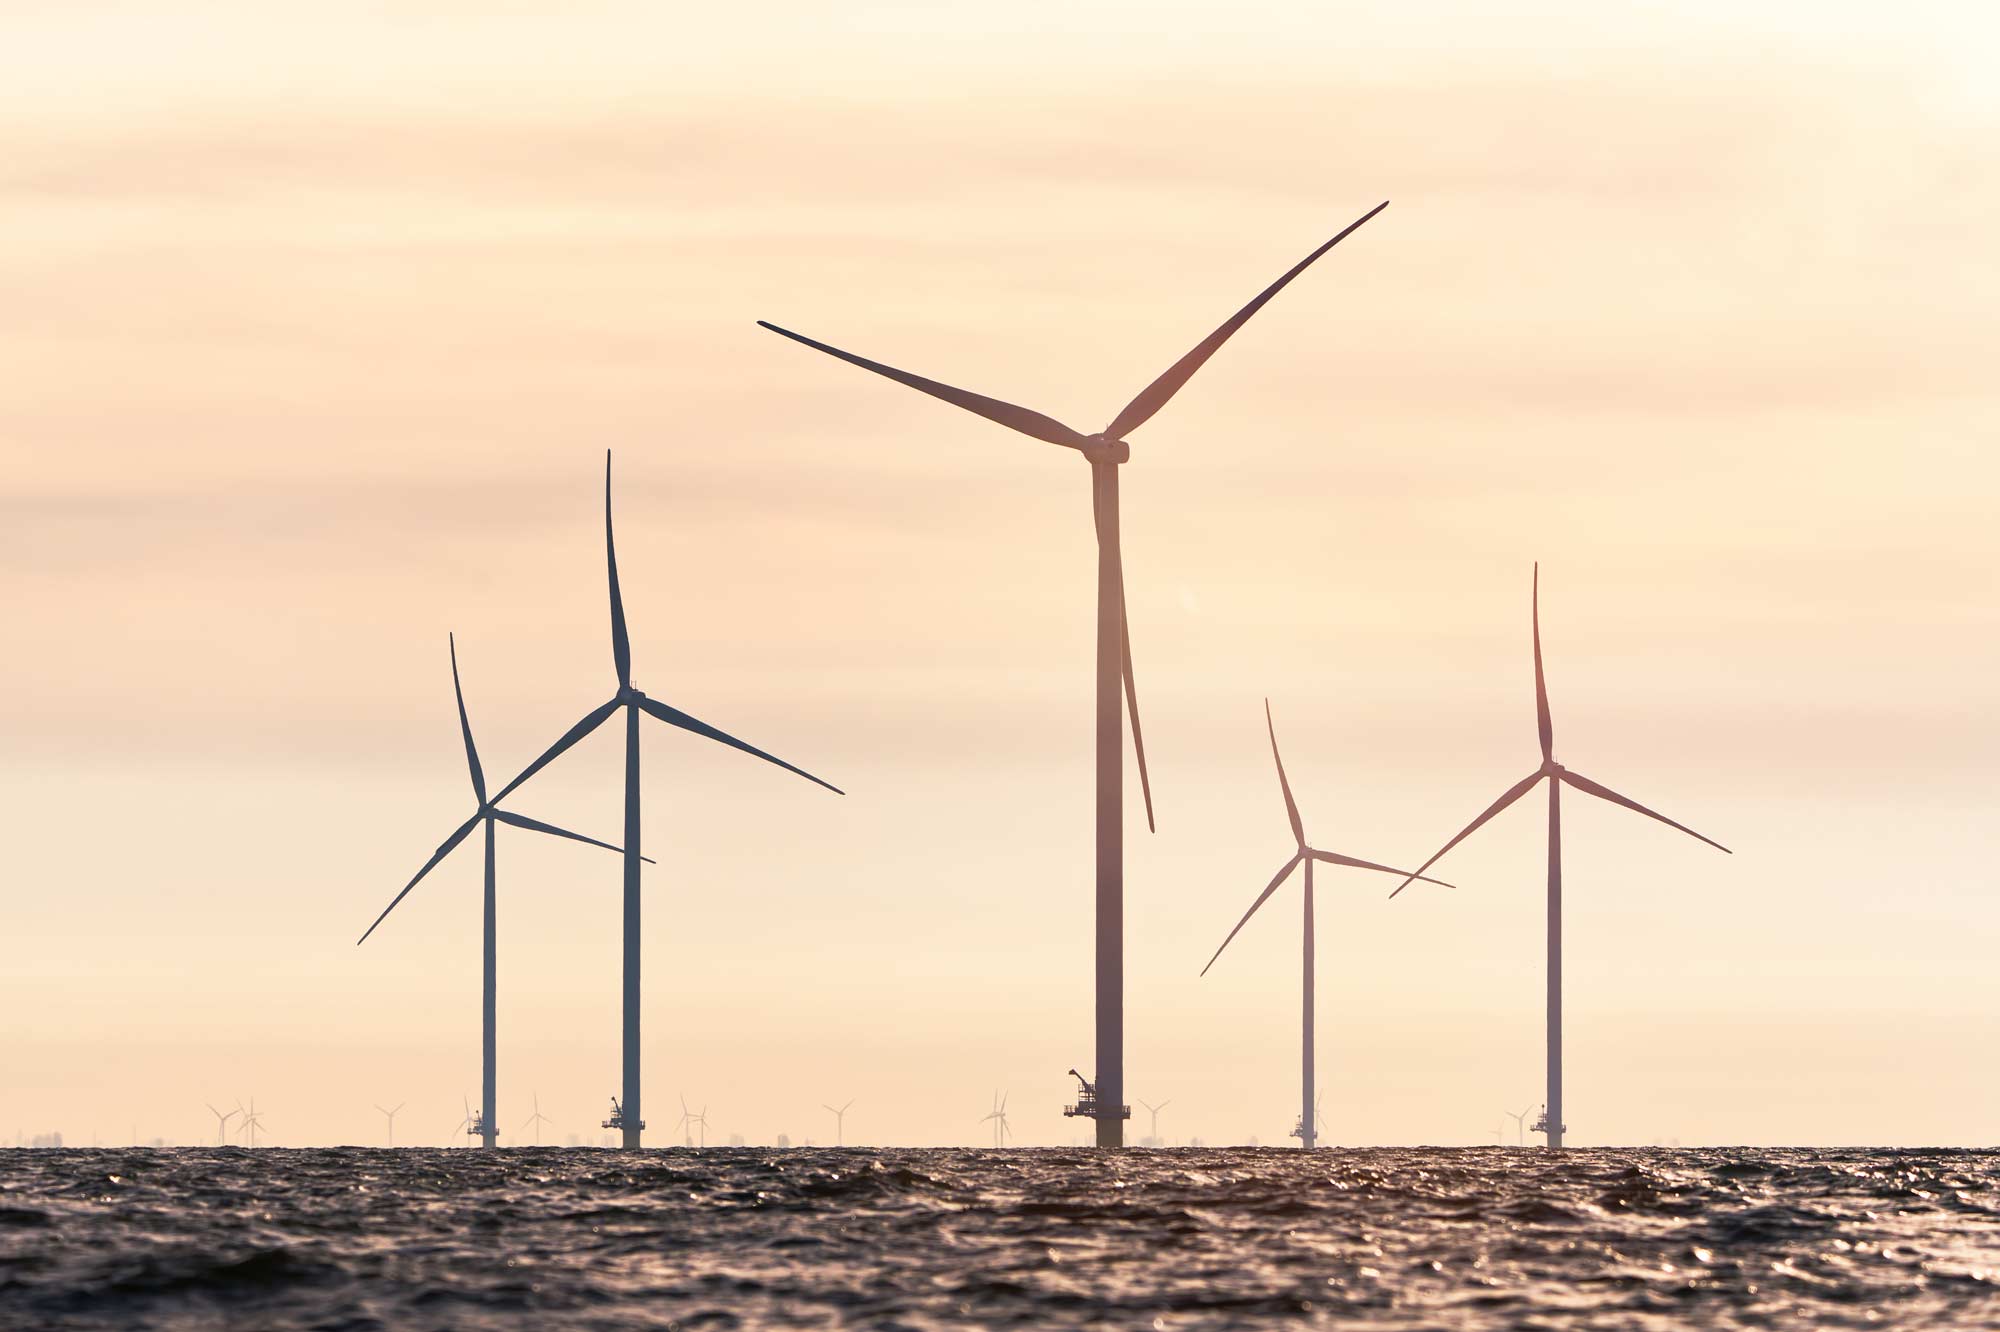 Commonwealth: Big decisions looming on offshore wind